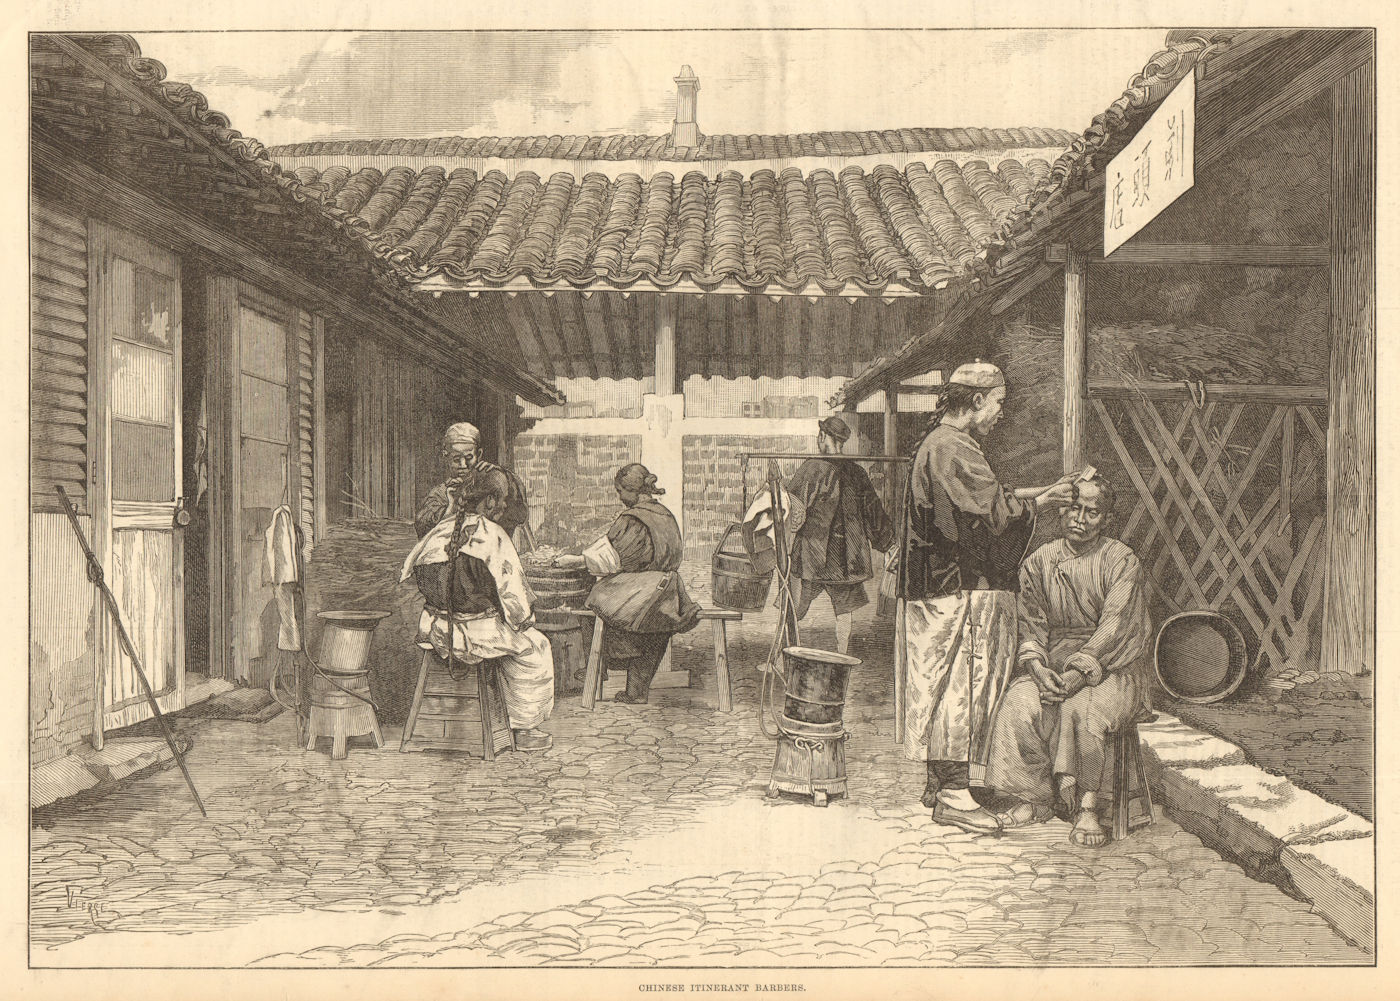 Associate Product Chinese itinerant barbers. Trades 1876 antique ILN full page print